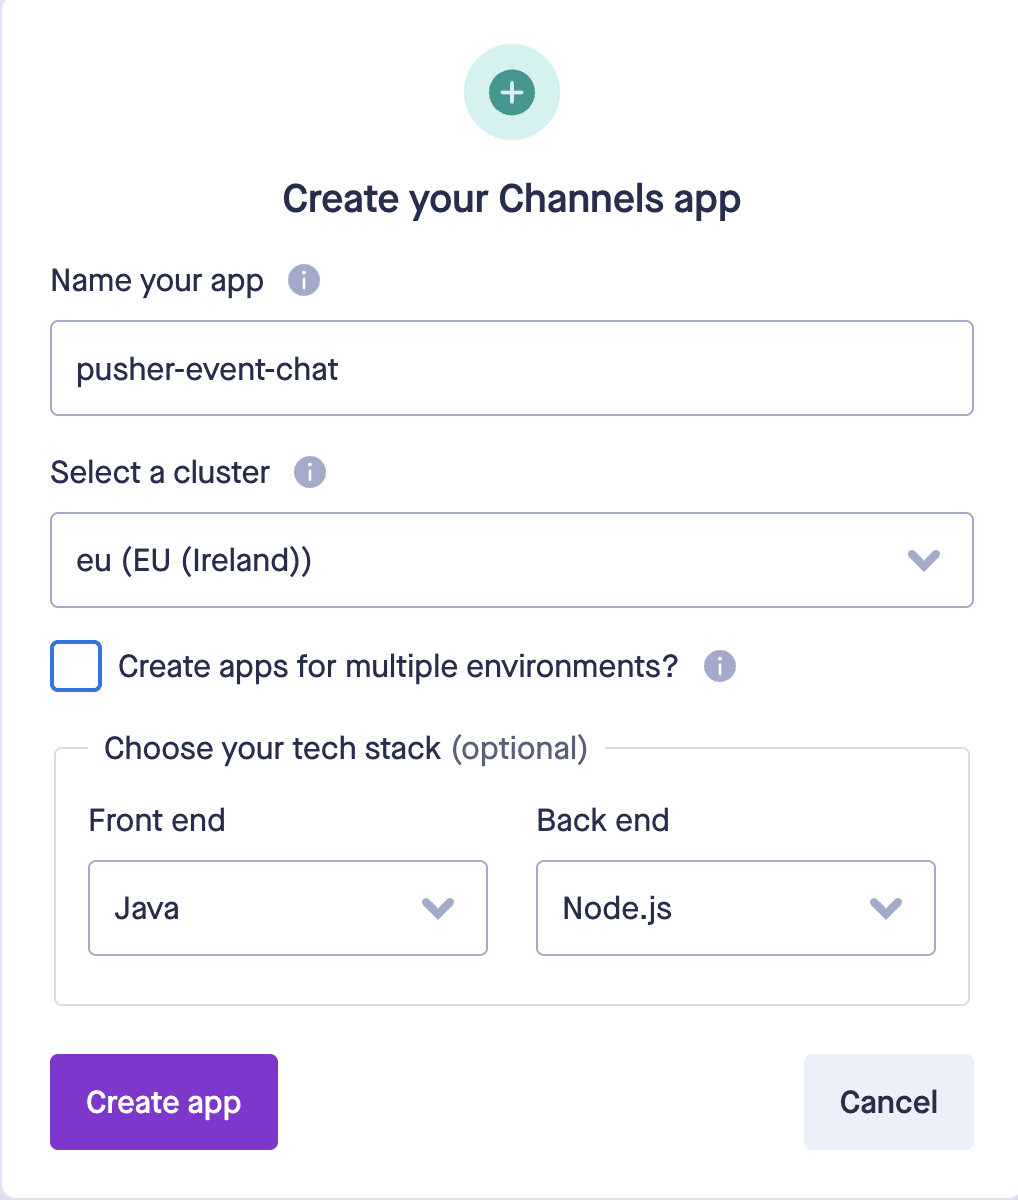 Create a new Channel app